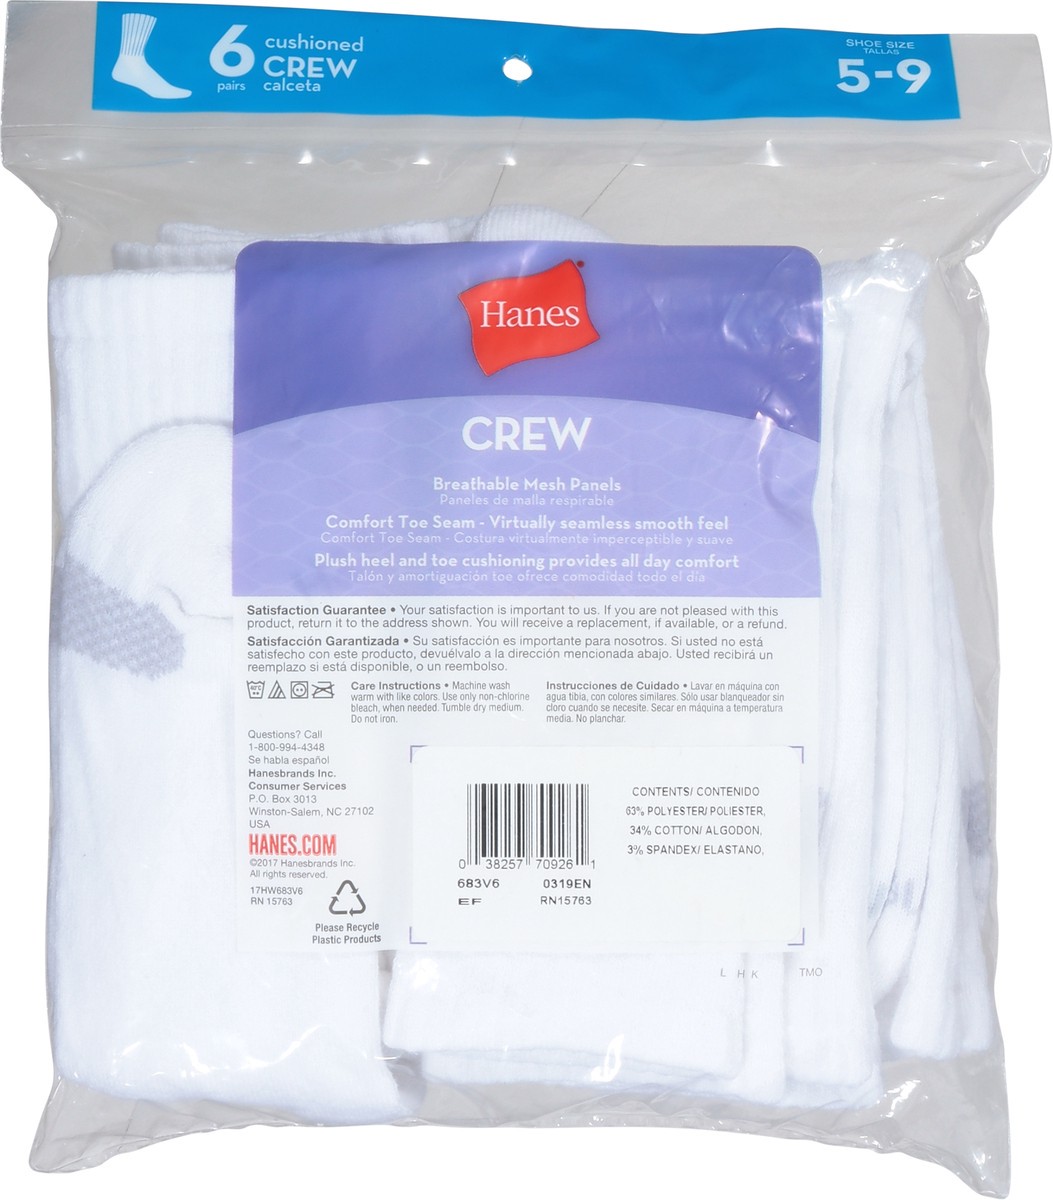 slide 5 of 9, Hanes Shoe Size 5-9 Cushioned Crew Socks 6 Pairs, 6 ct